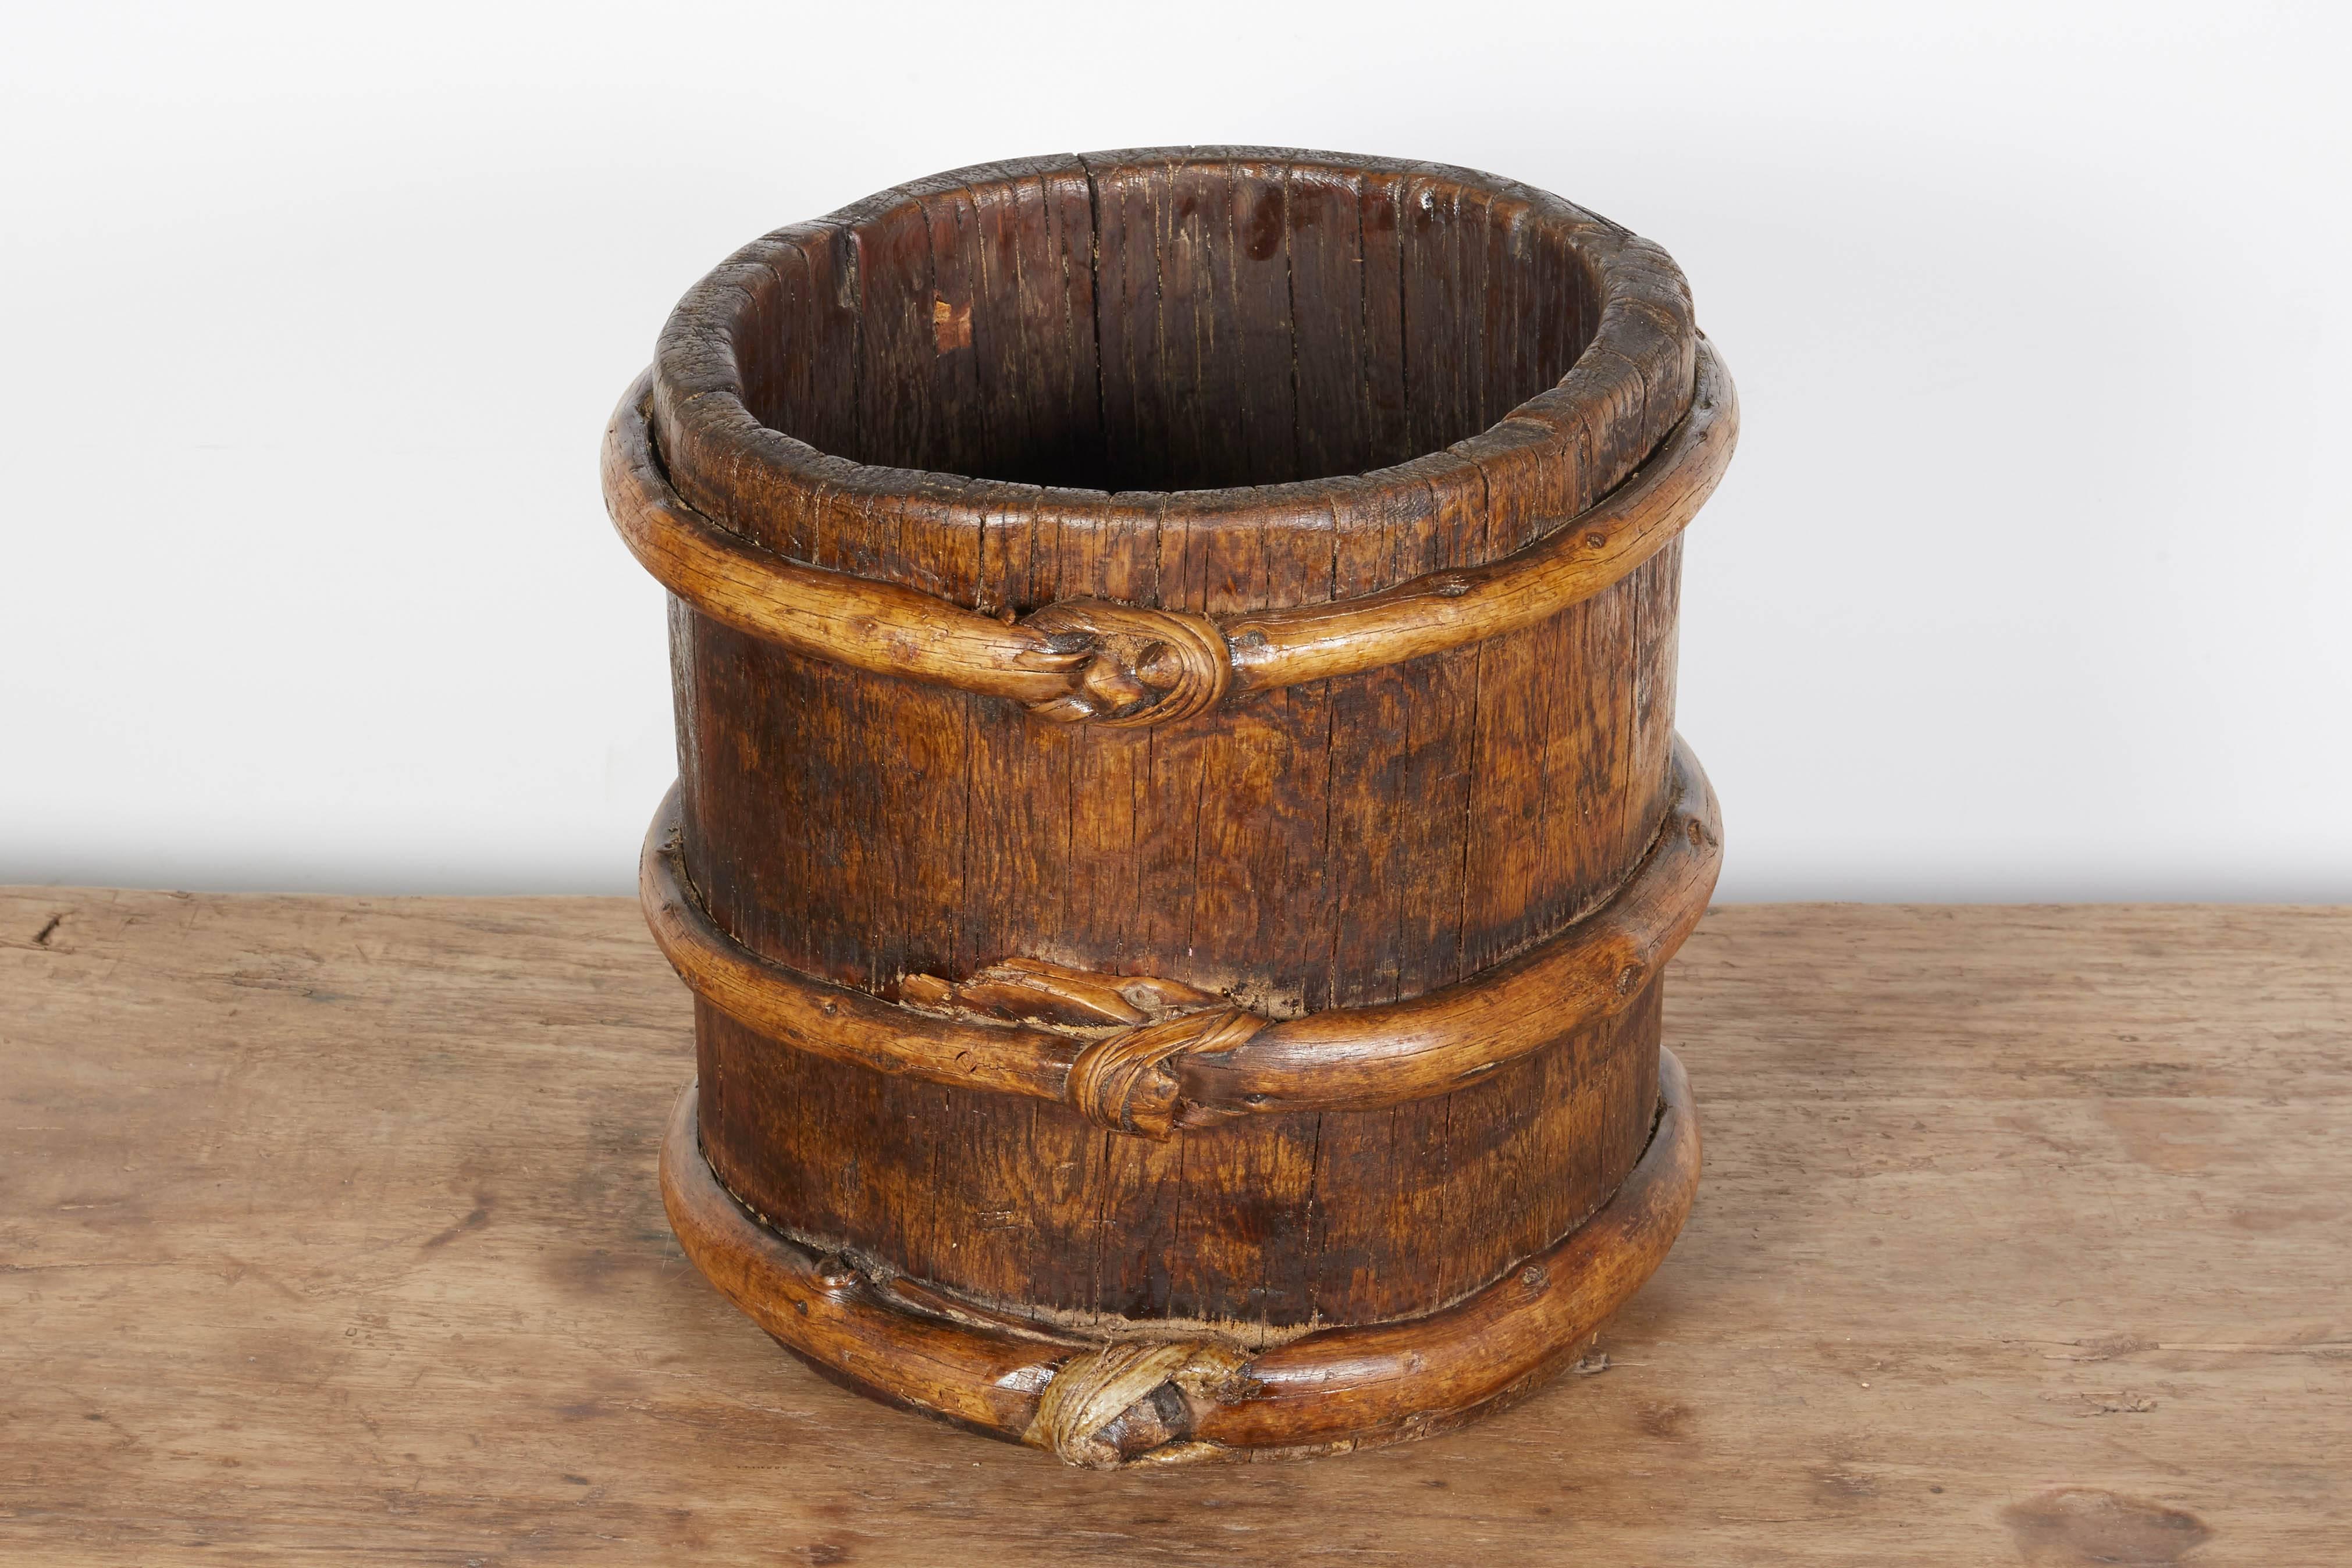 An early 20th century wooden Tibetan yak butter churn with striking patina created by years of use with three knotted straps around the circumference of the piece. A very handsome object that can be used in versatile ways, and a great conversation